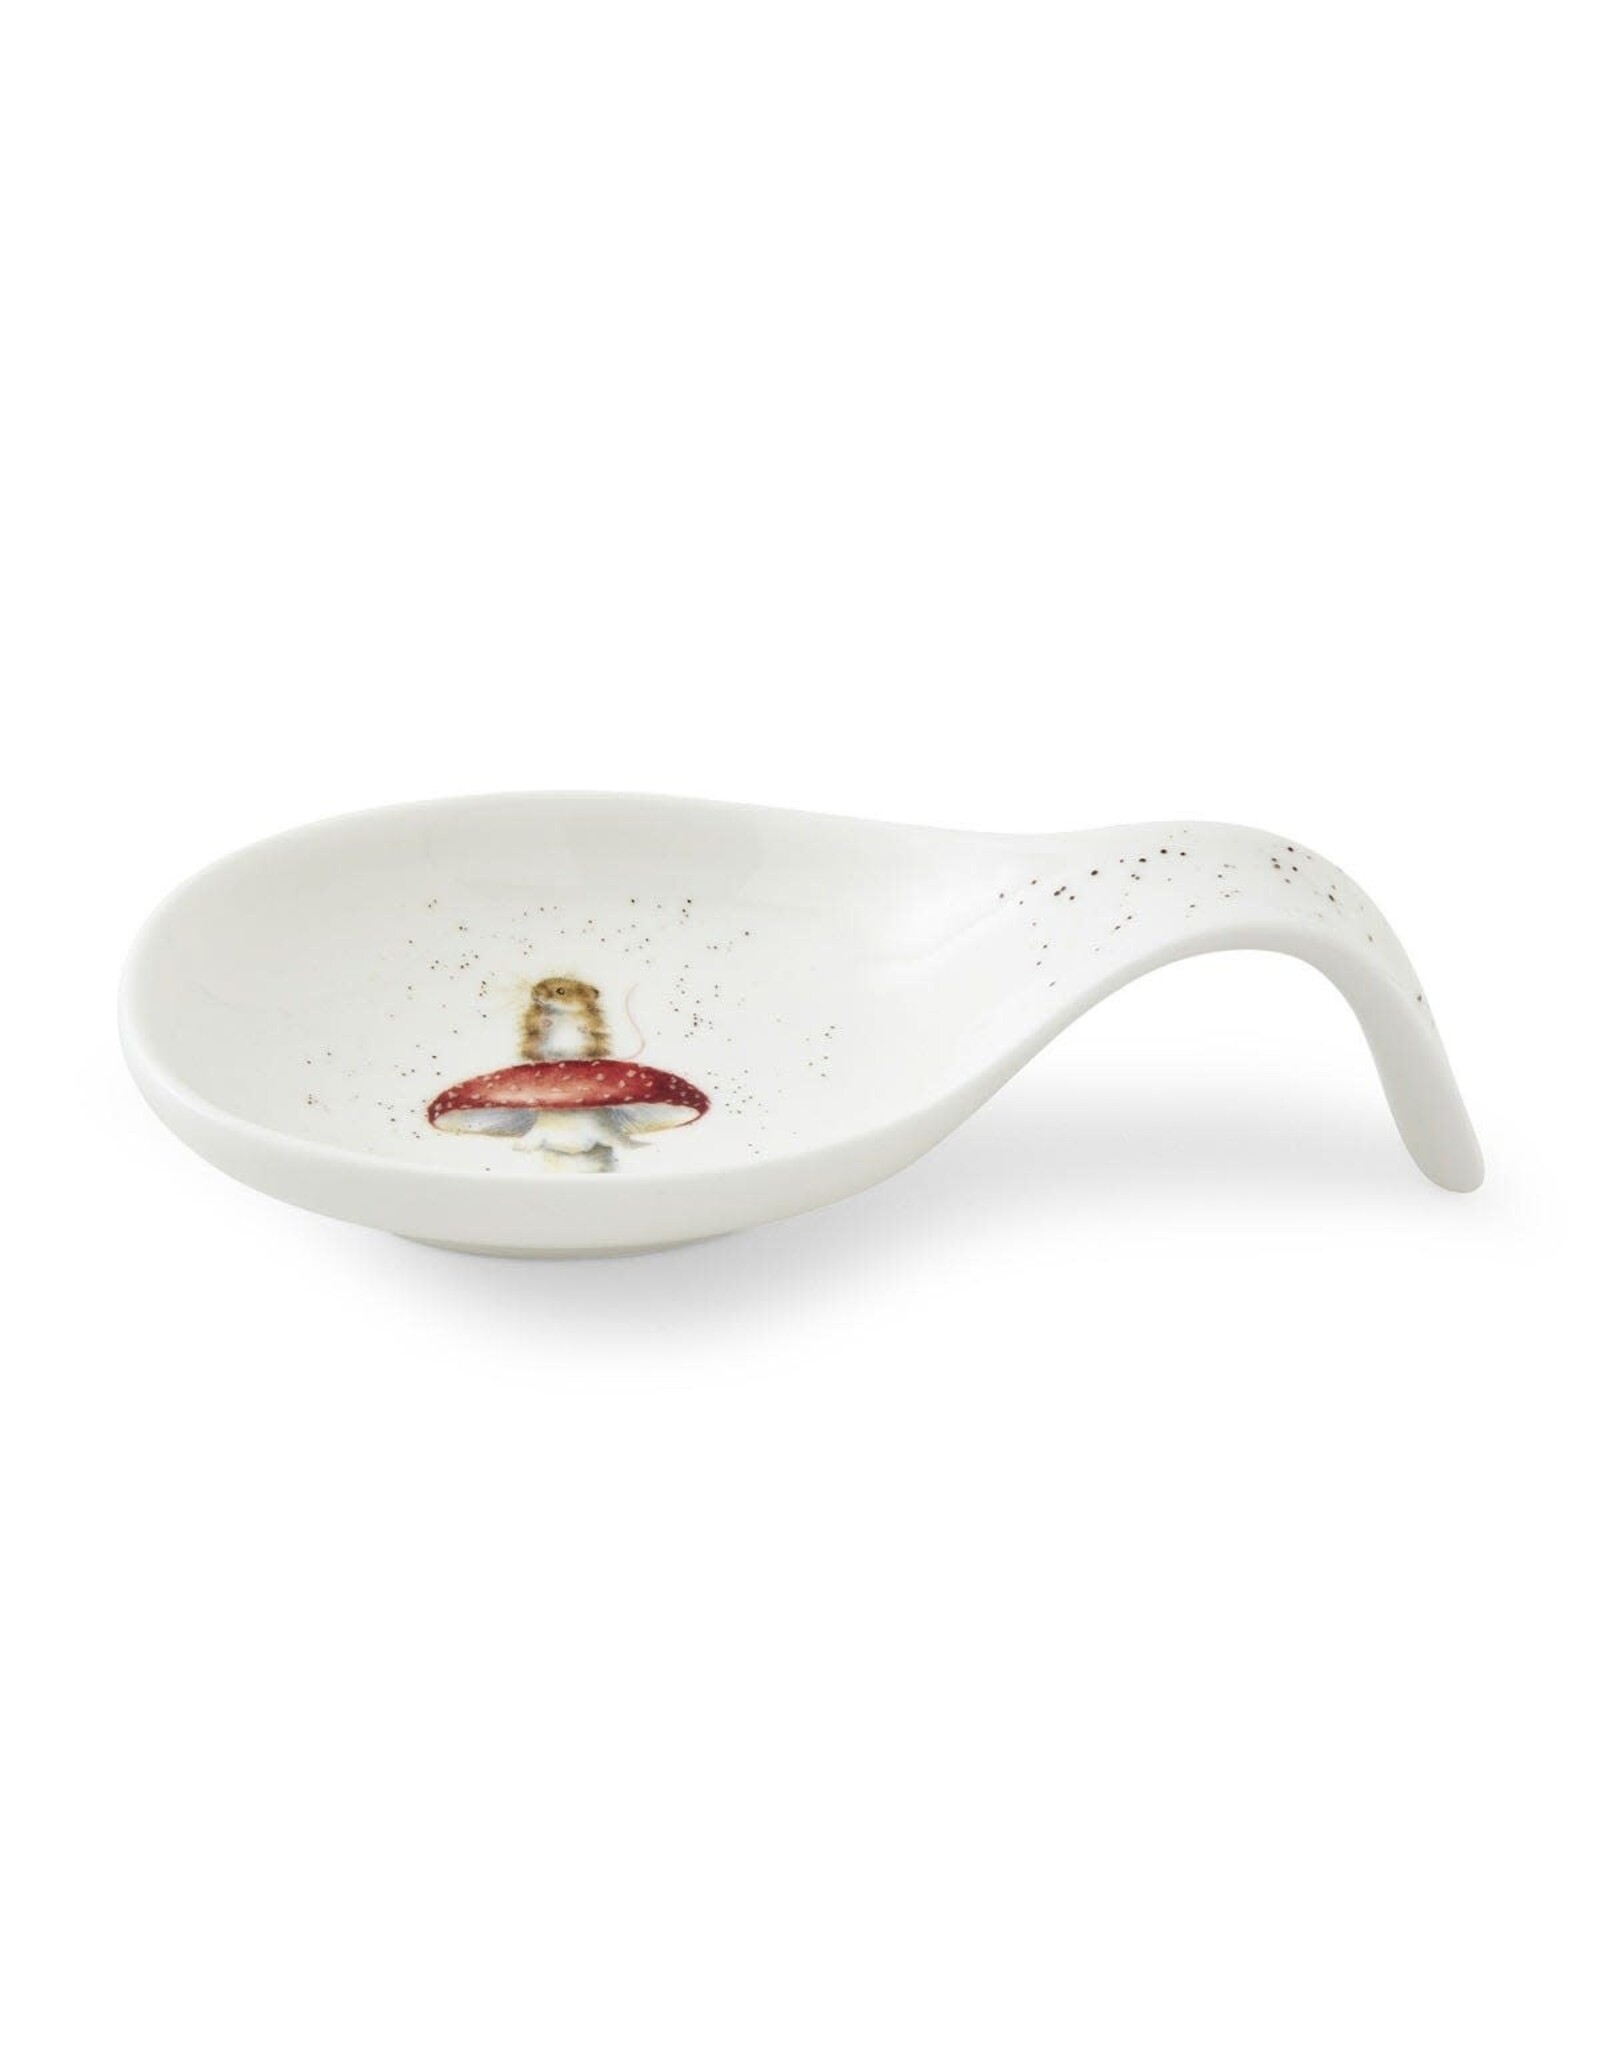 Wrendale Spoon Rest - Mouse